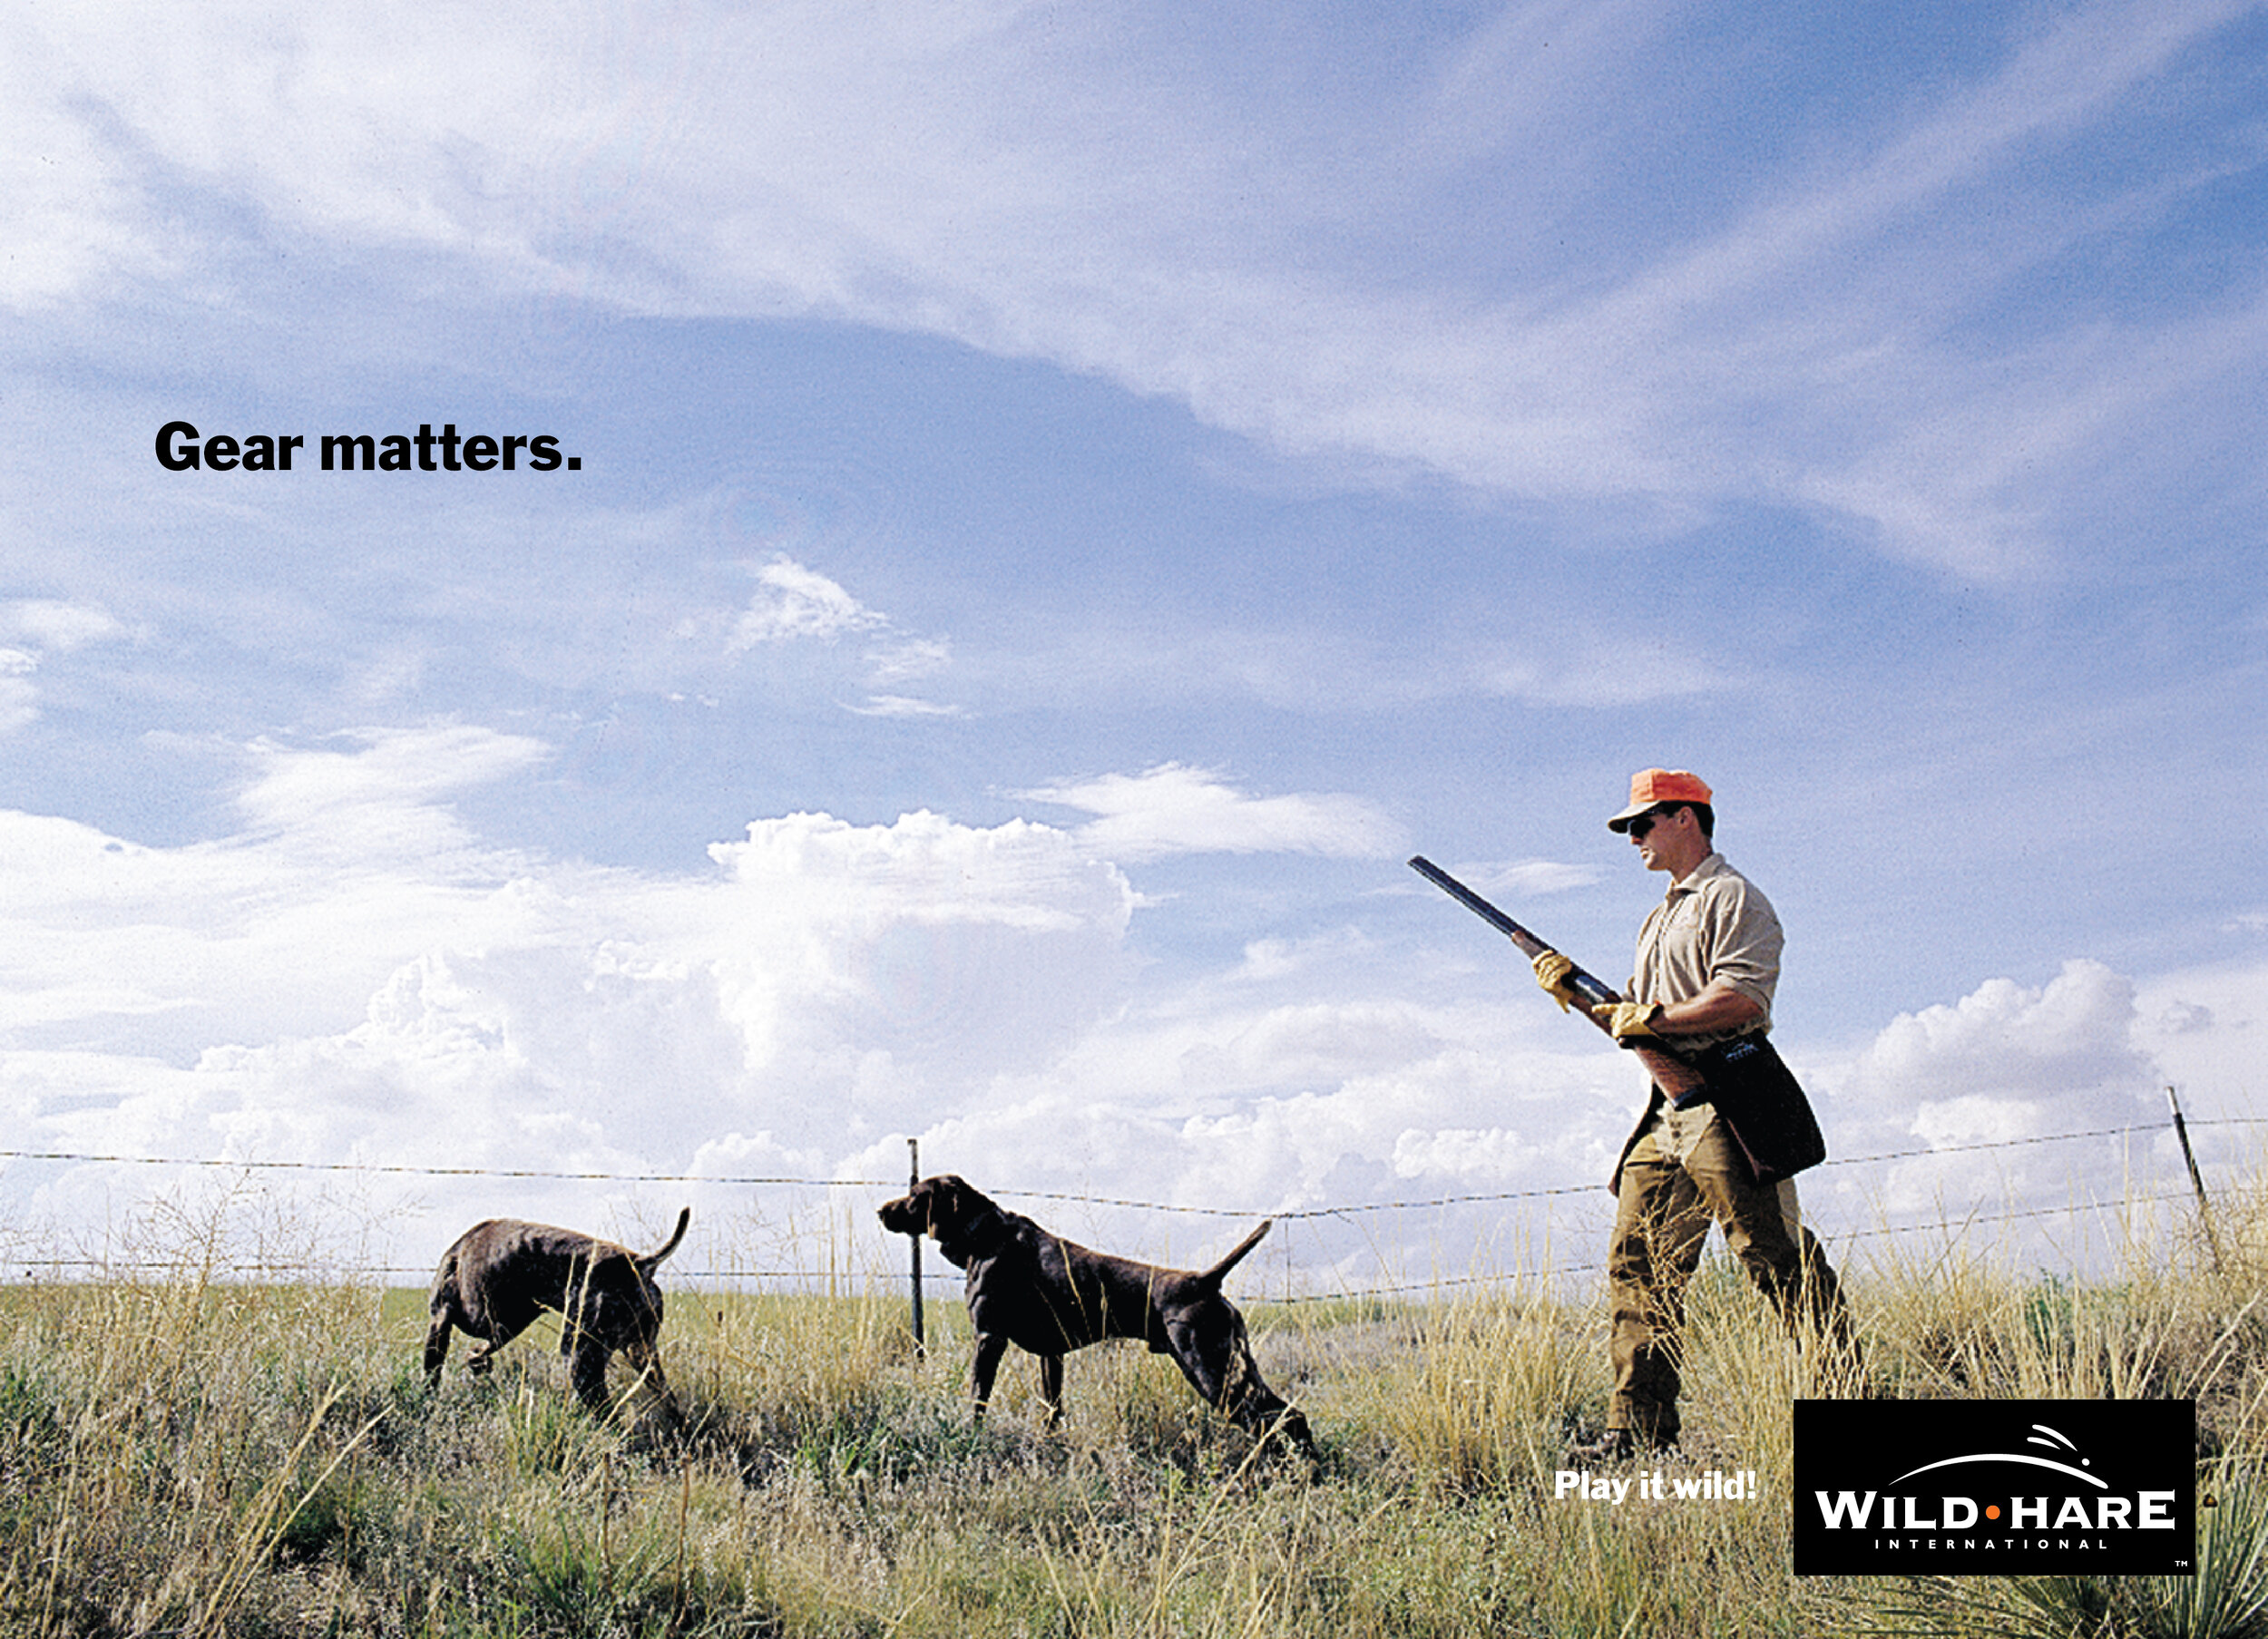  Wild•Hare International Gear Matters consumer ad  Design, branding and creative direction by Chuck Mitchell  Photograph by Jack Kenner 